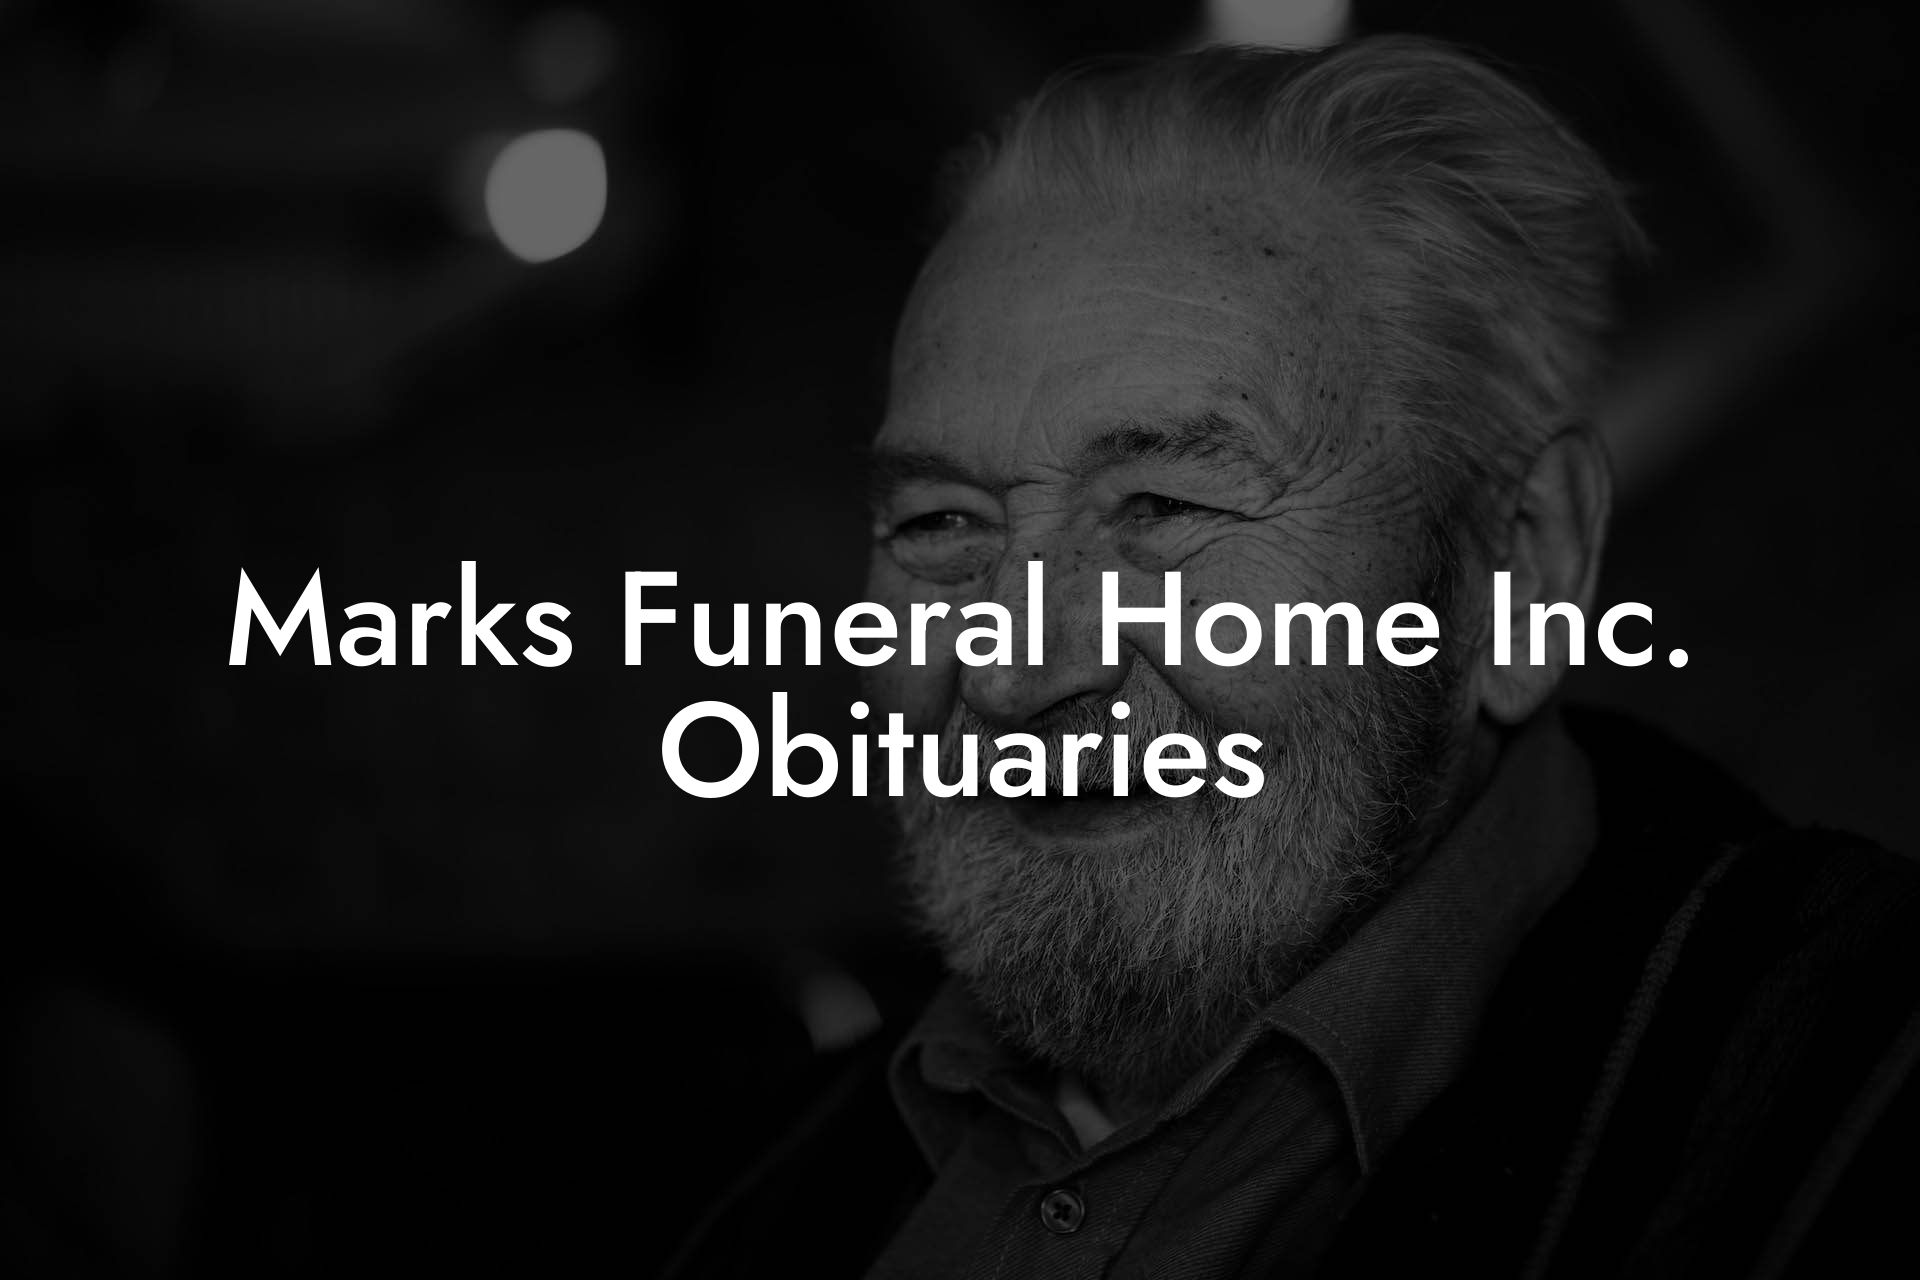 Marks Funeral Home Inc. Obituaries